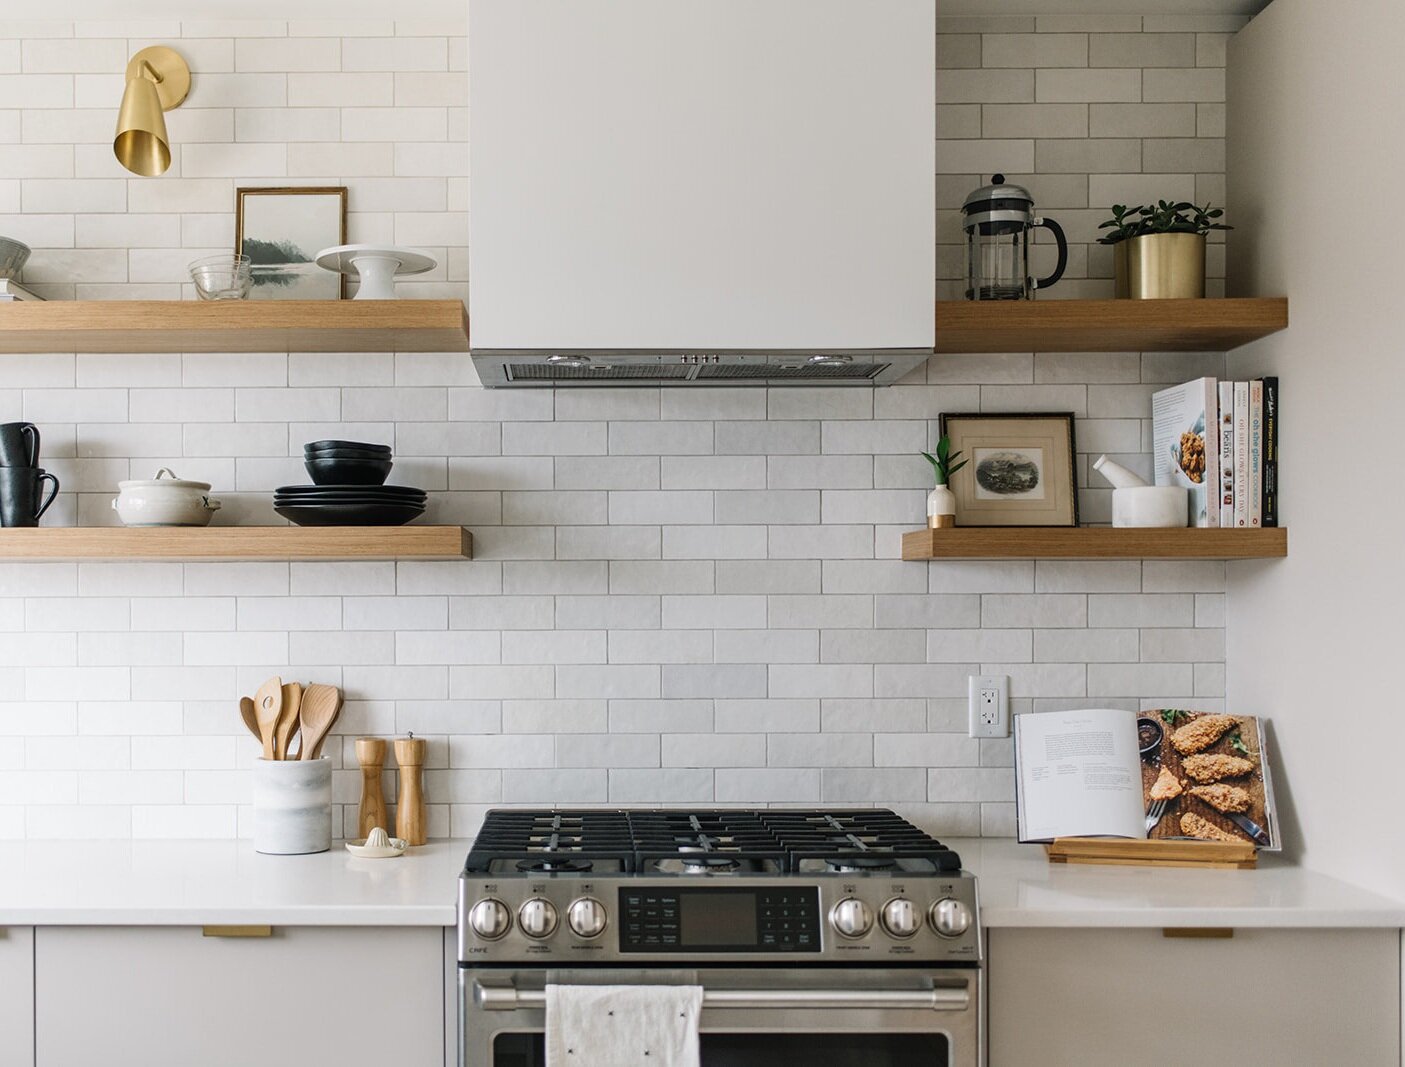 Floating Shelf Kitch, How To Place Floating Shelves In Kitchen